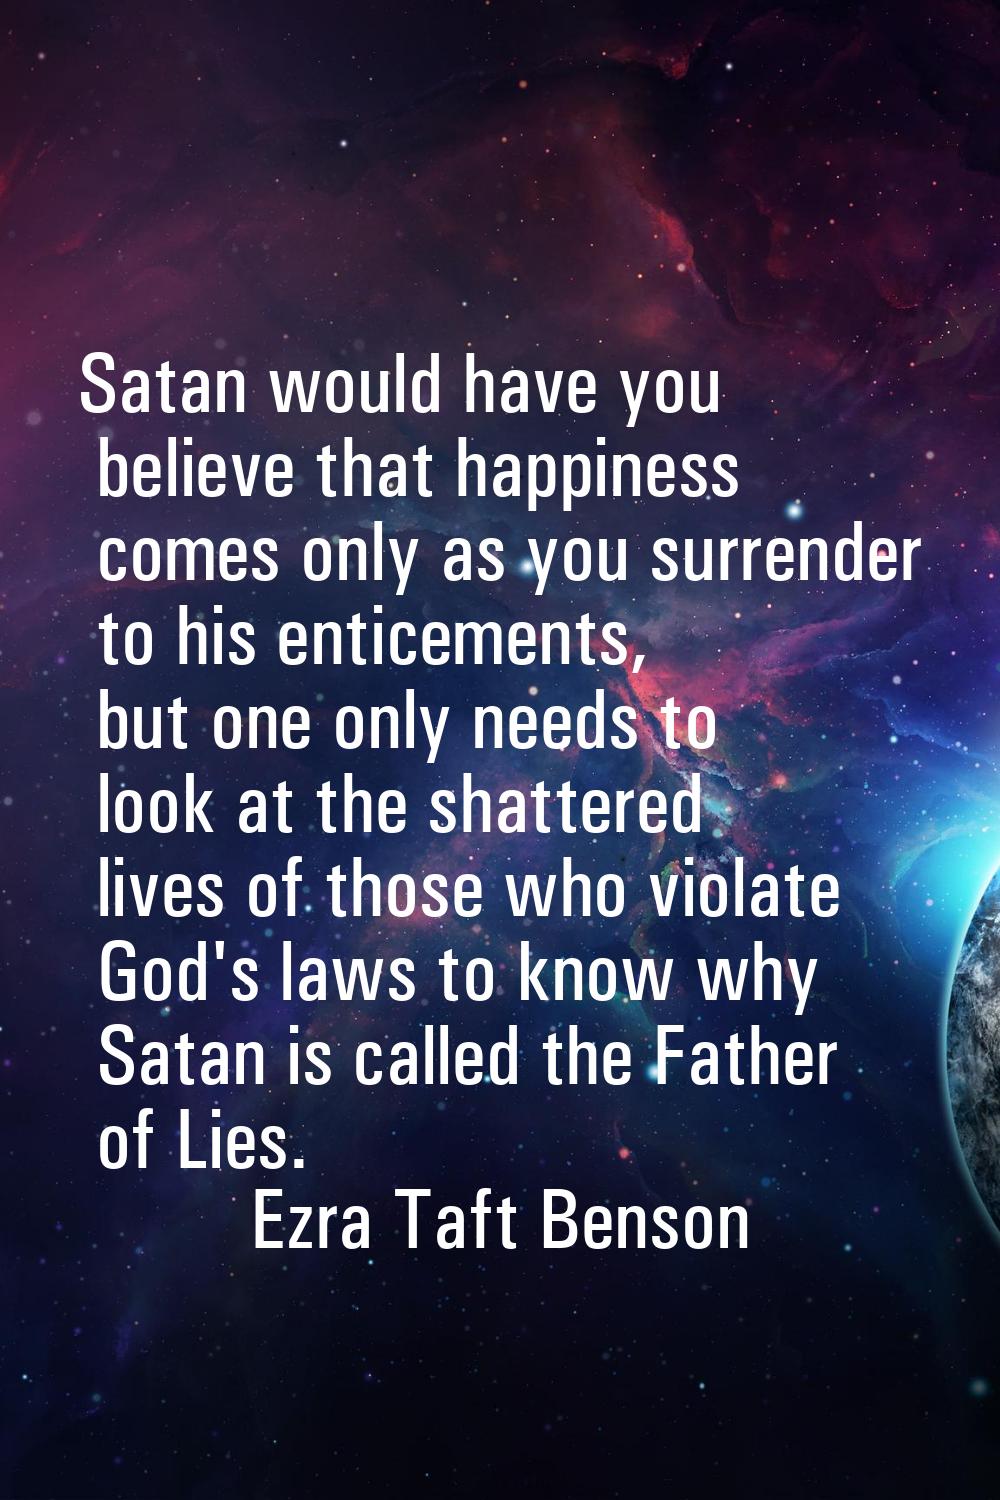 Satan would have you believe that happiness comes only as you surrender to his enticements, but one